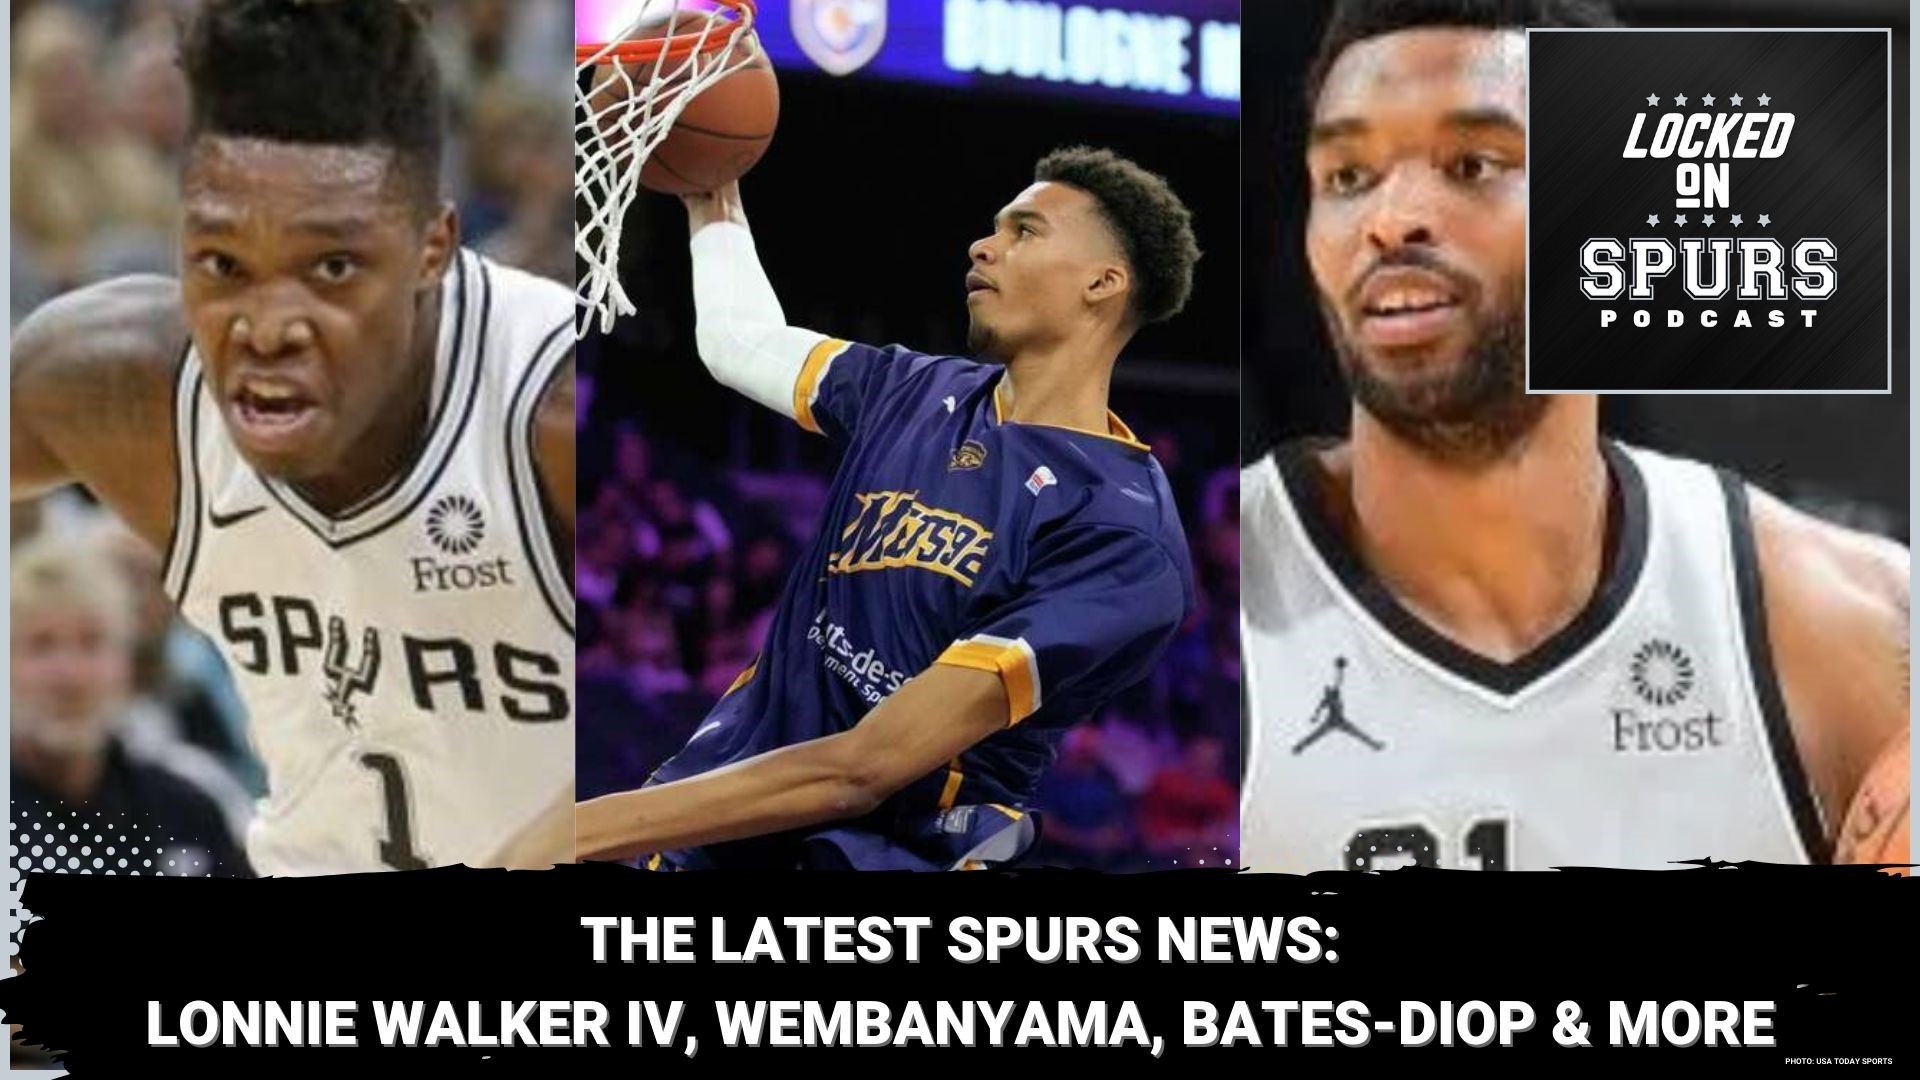 Let's catch up on some Spurs news and notes.